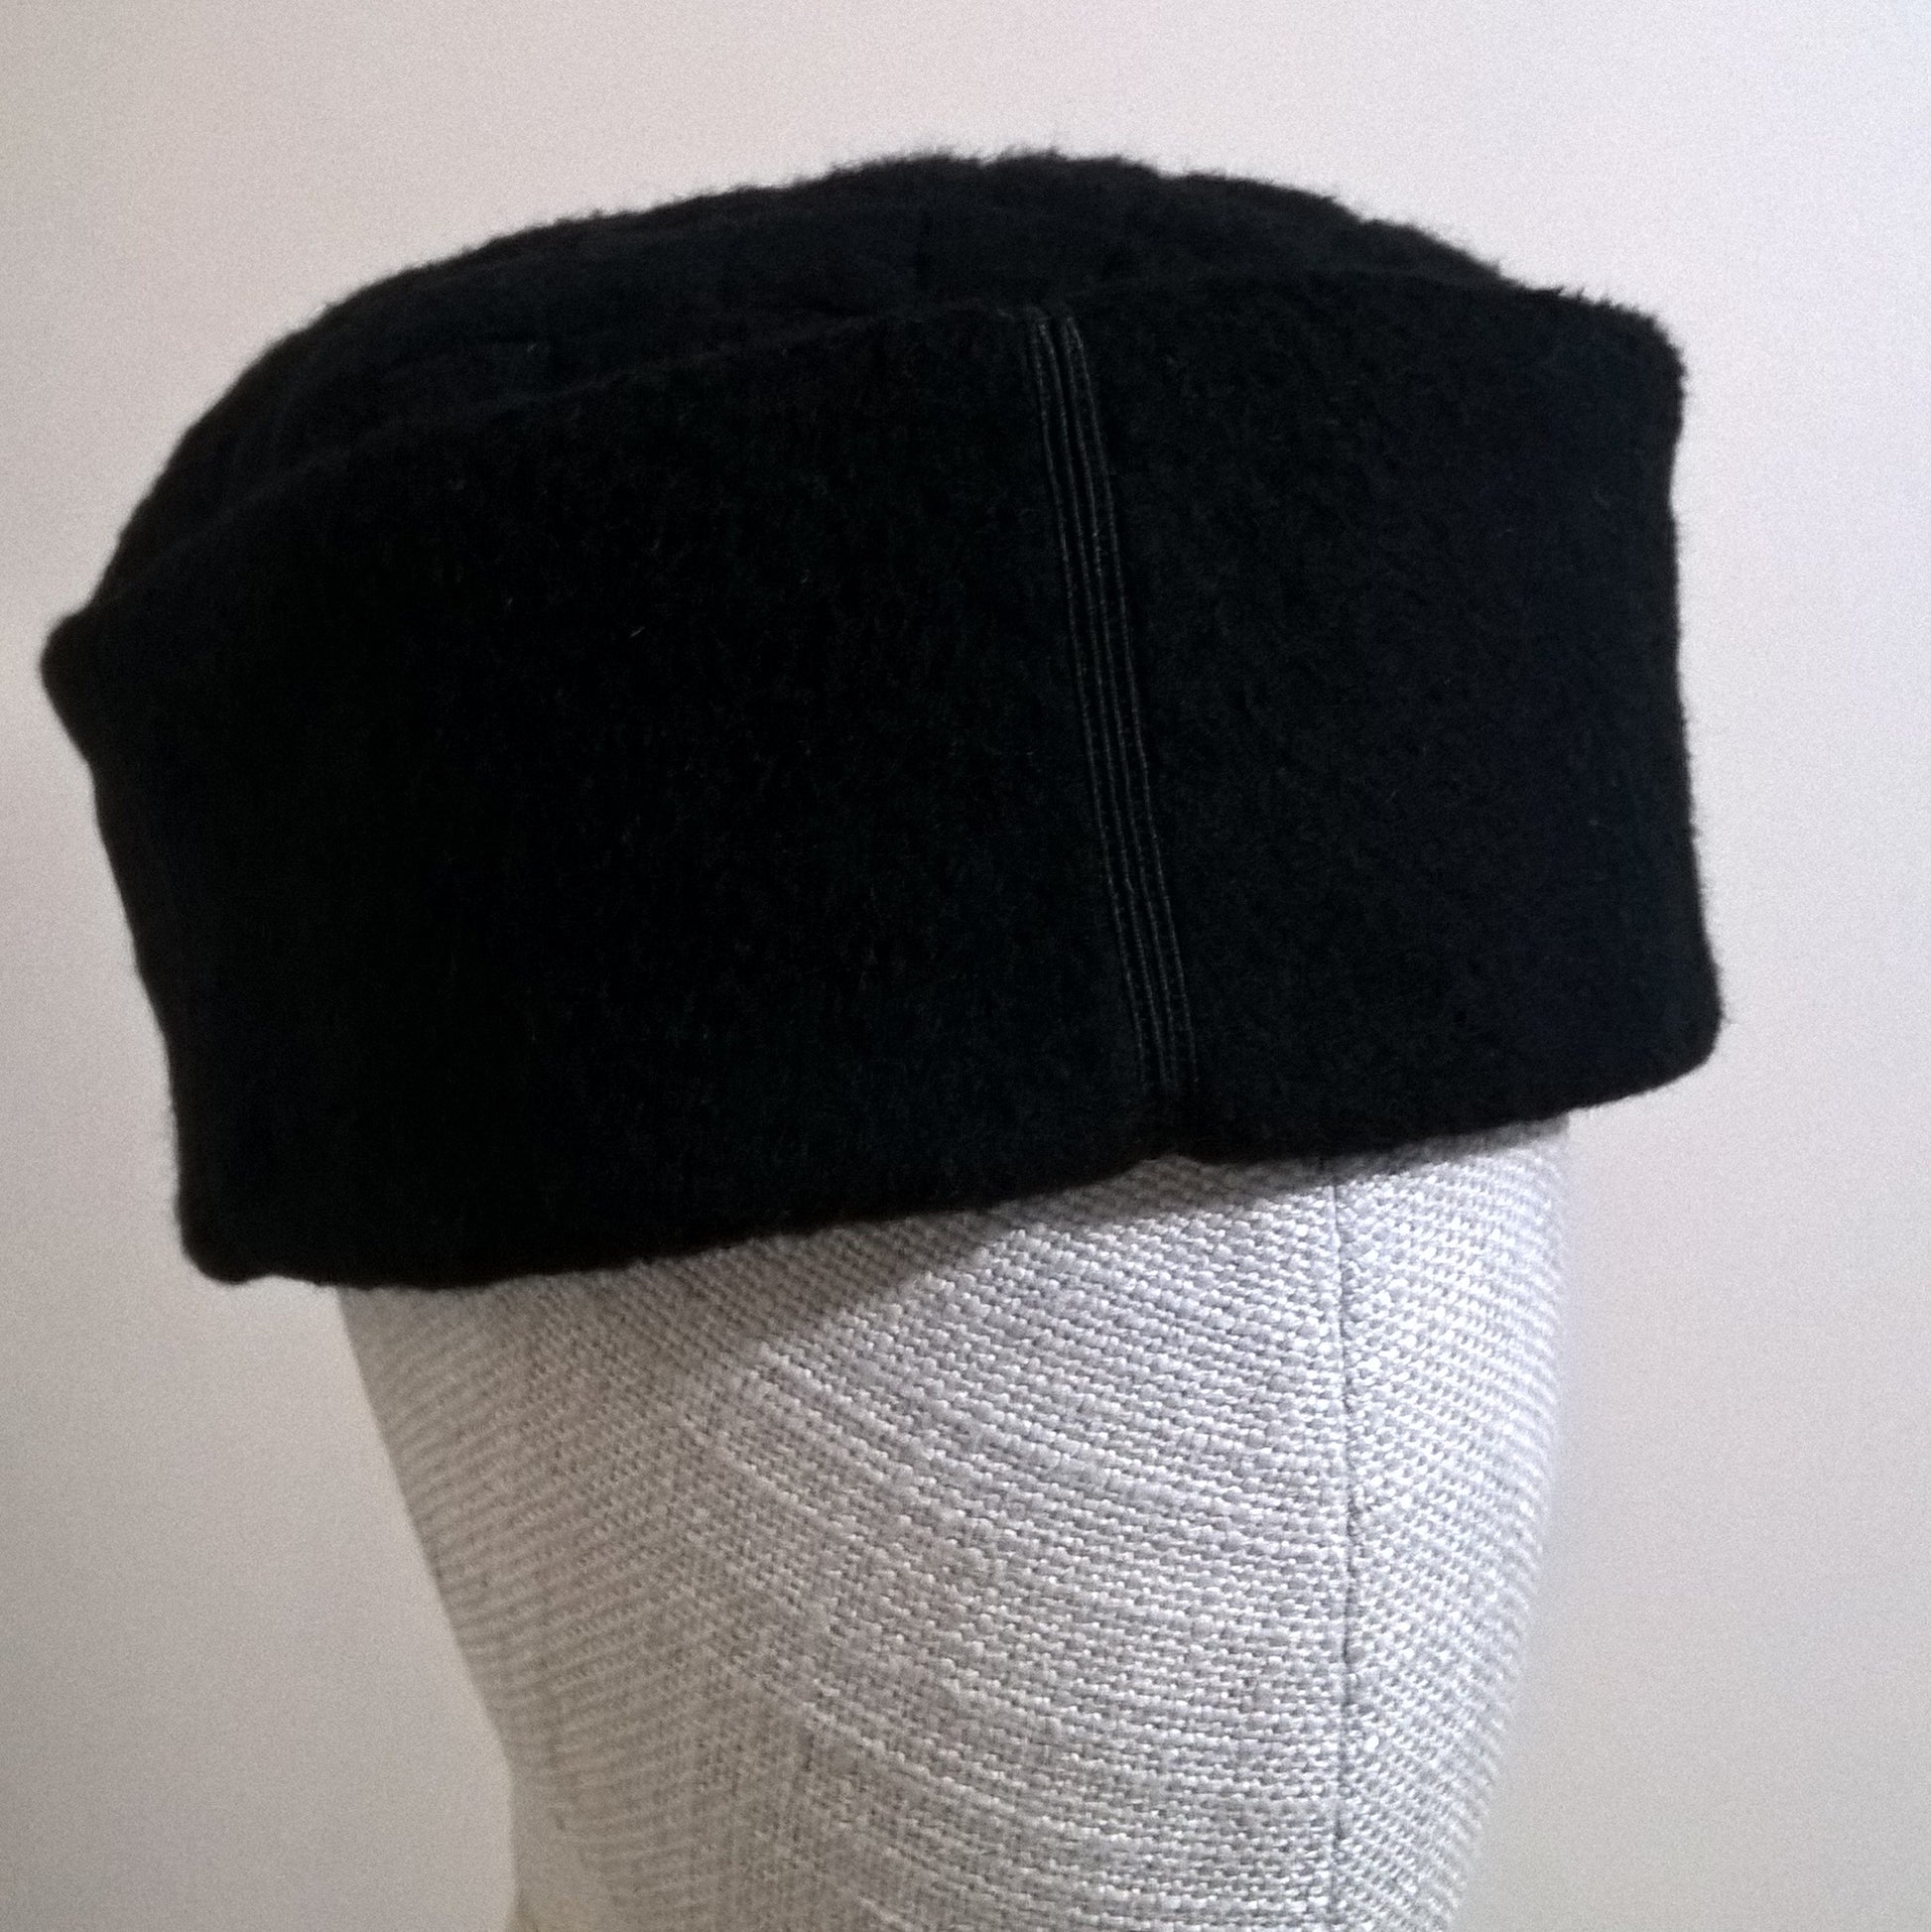 Smart black cashmere skull cap with satin braid and button detail on Crown